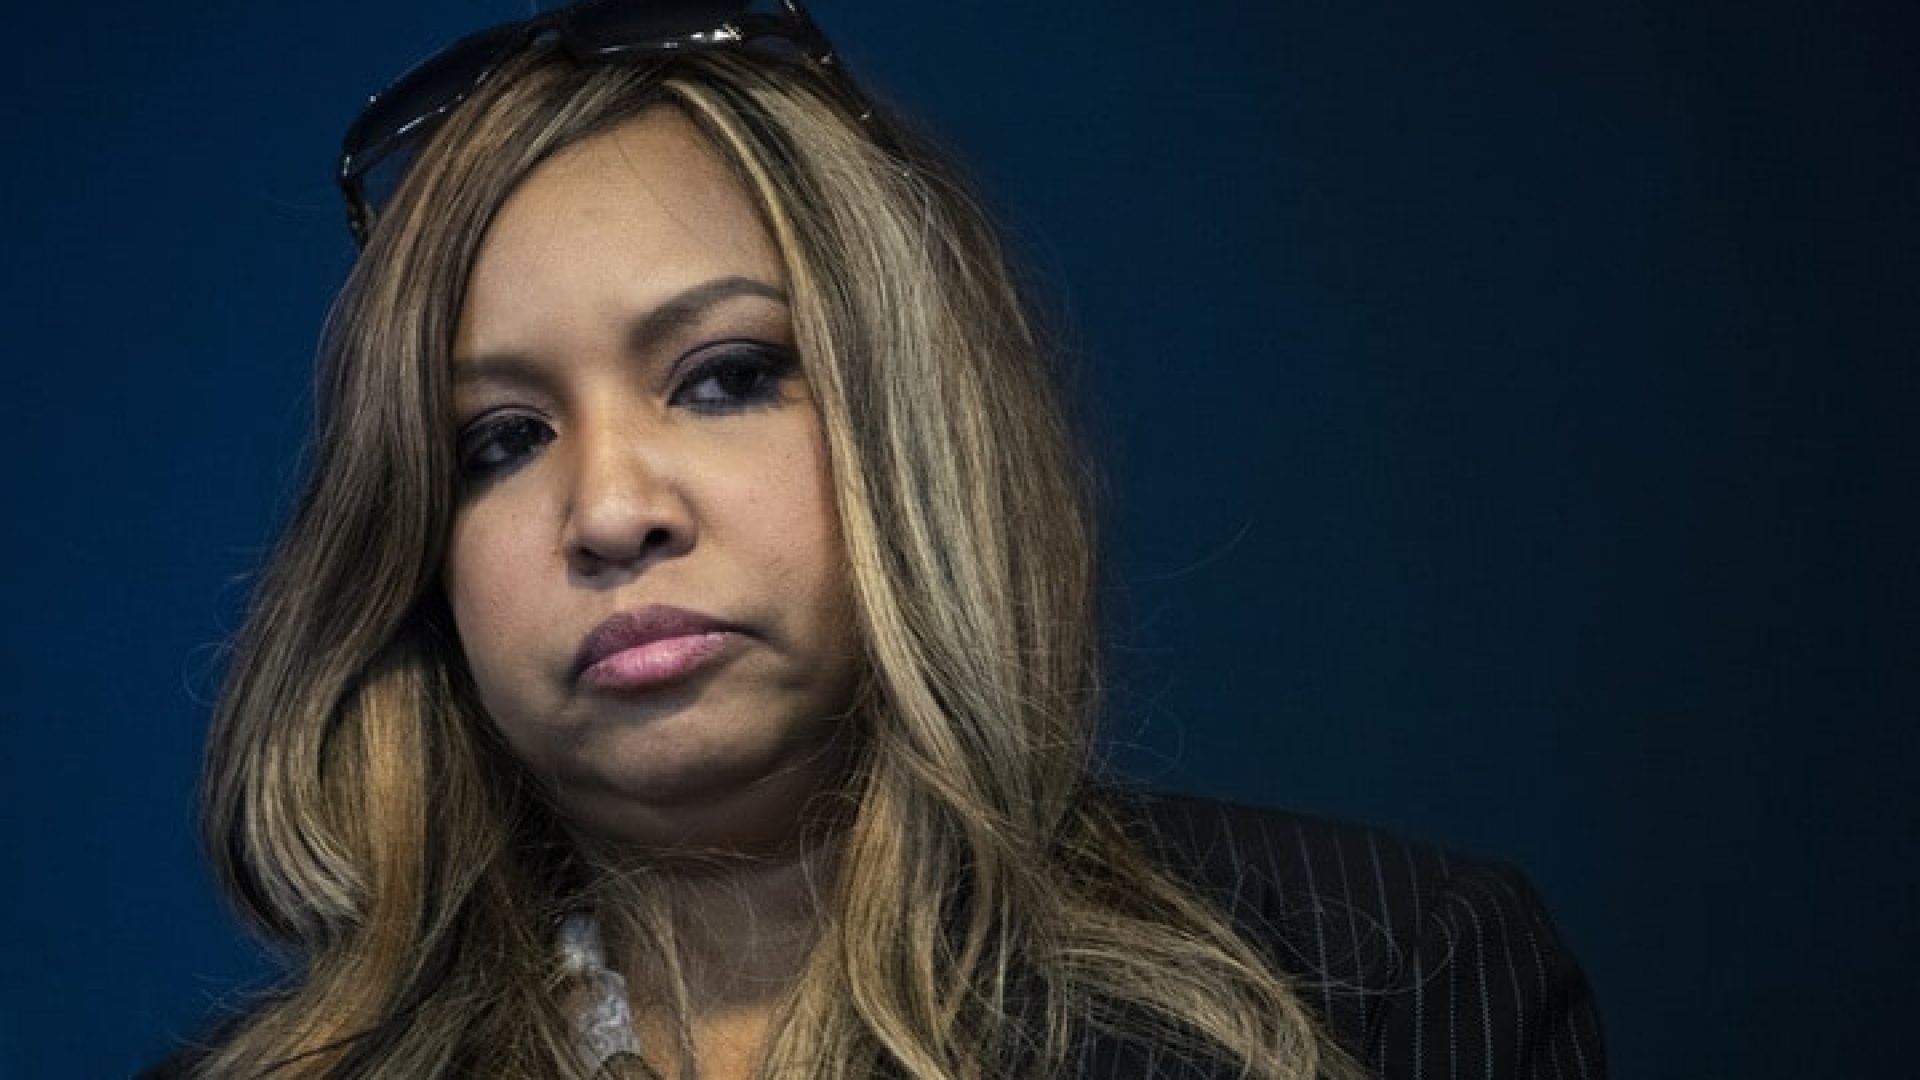 HUD Official Lynne Patton Insists She's 'Not A Prop' After Appearance At Michael Cohen's Congressional Hearing